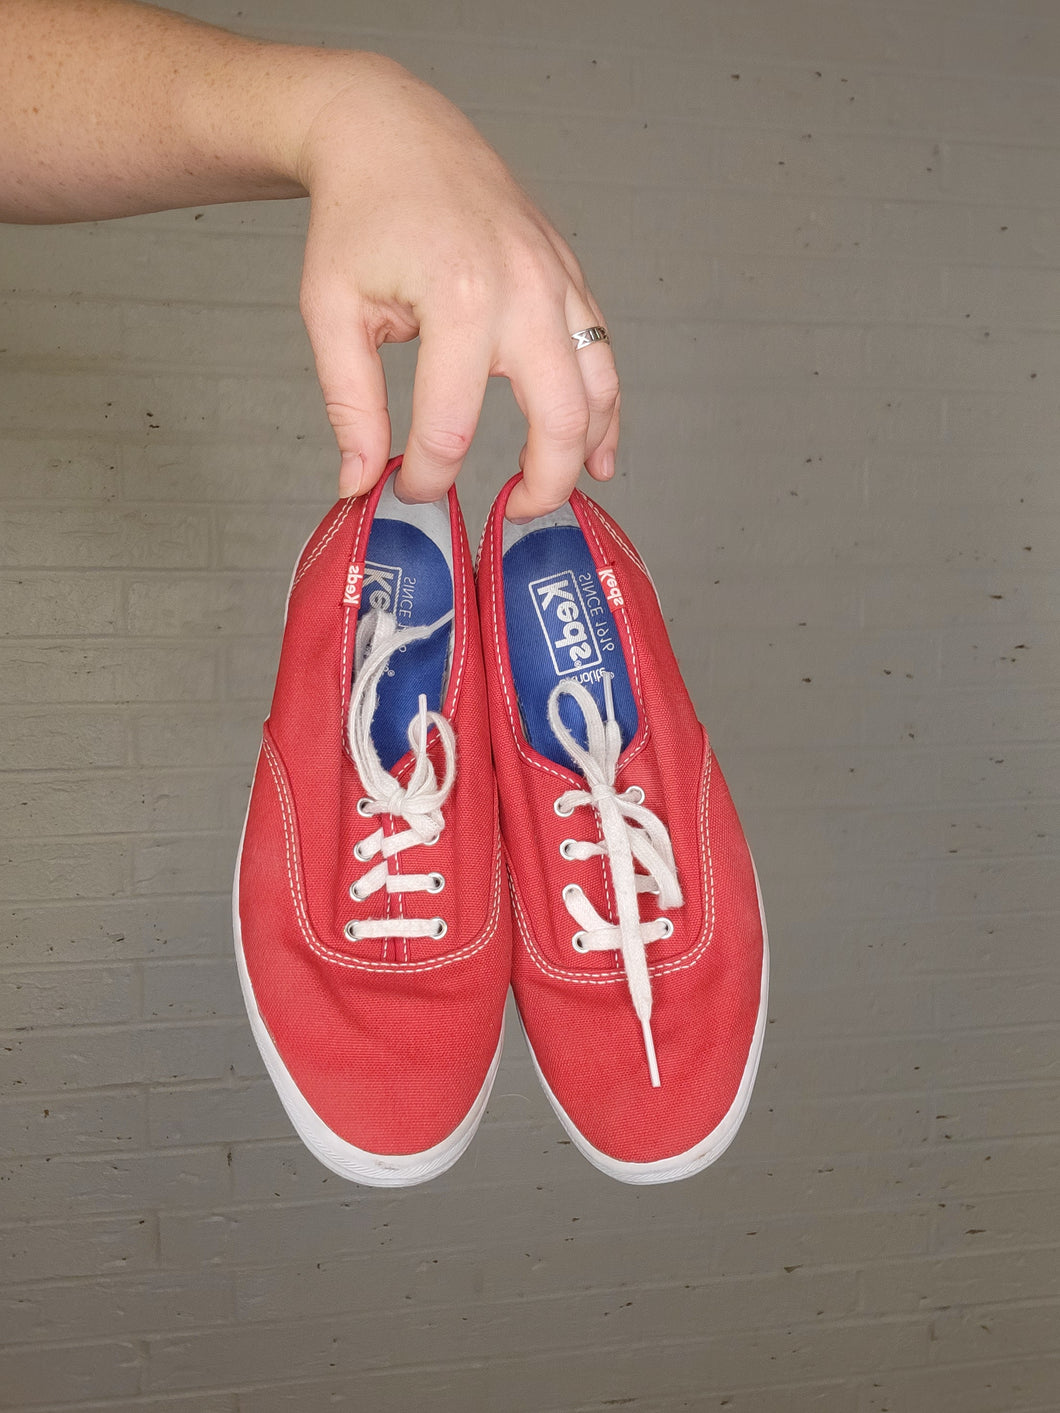 Classic red Keds